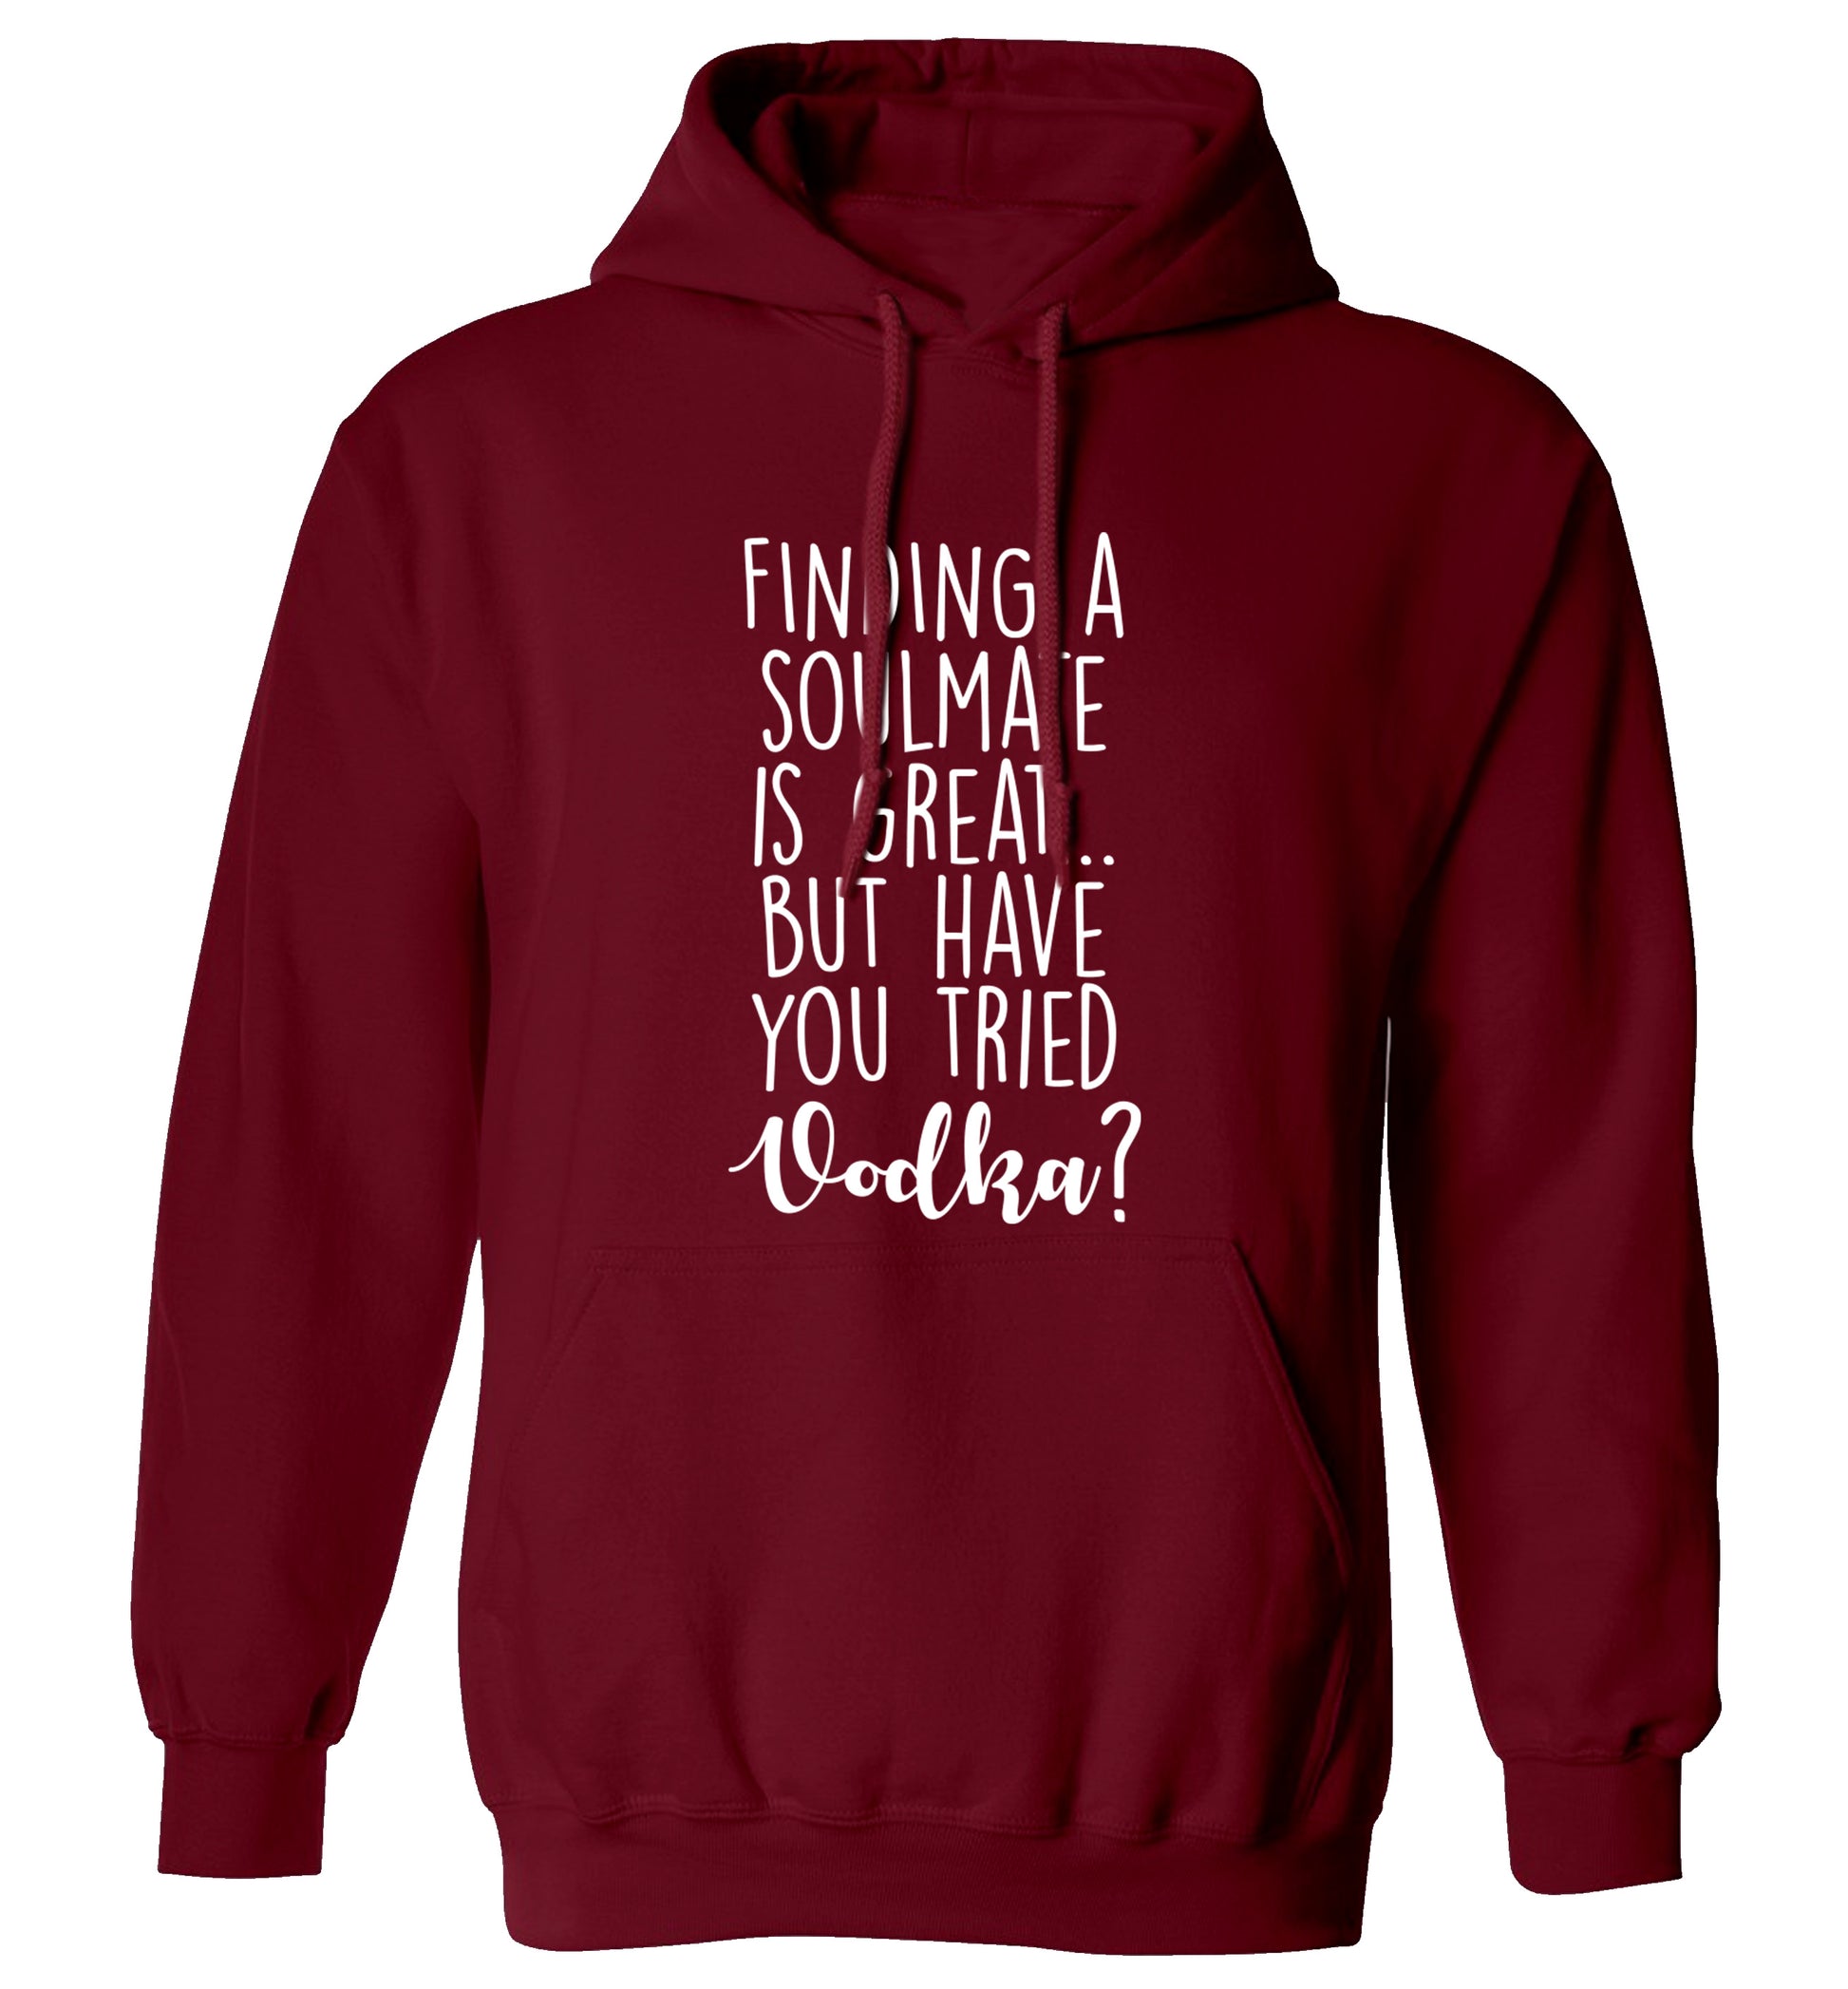 Finding a soulmate is great but have you tried vodka? adults unisex maroon hoodie 2XL